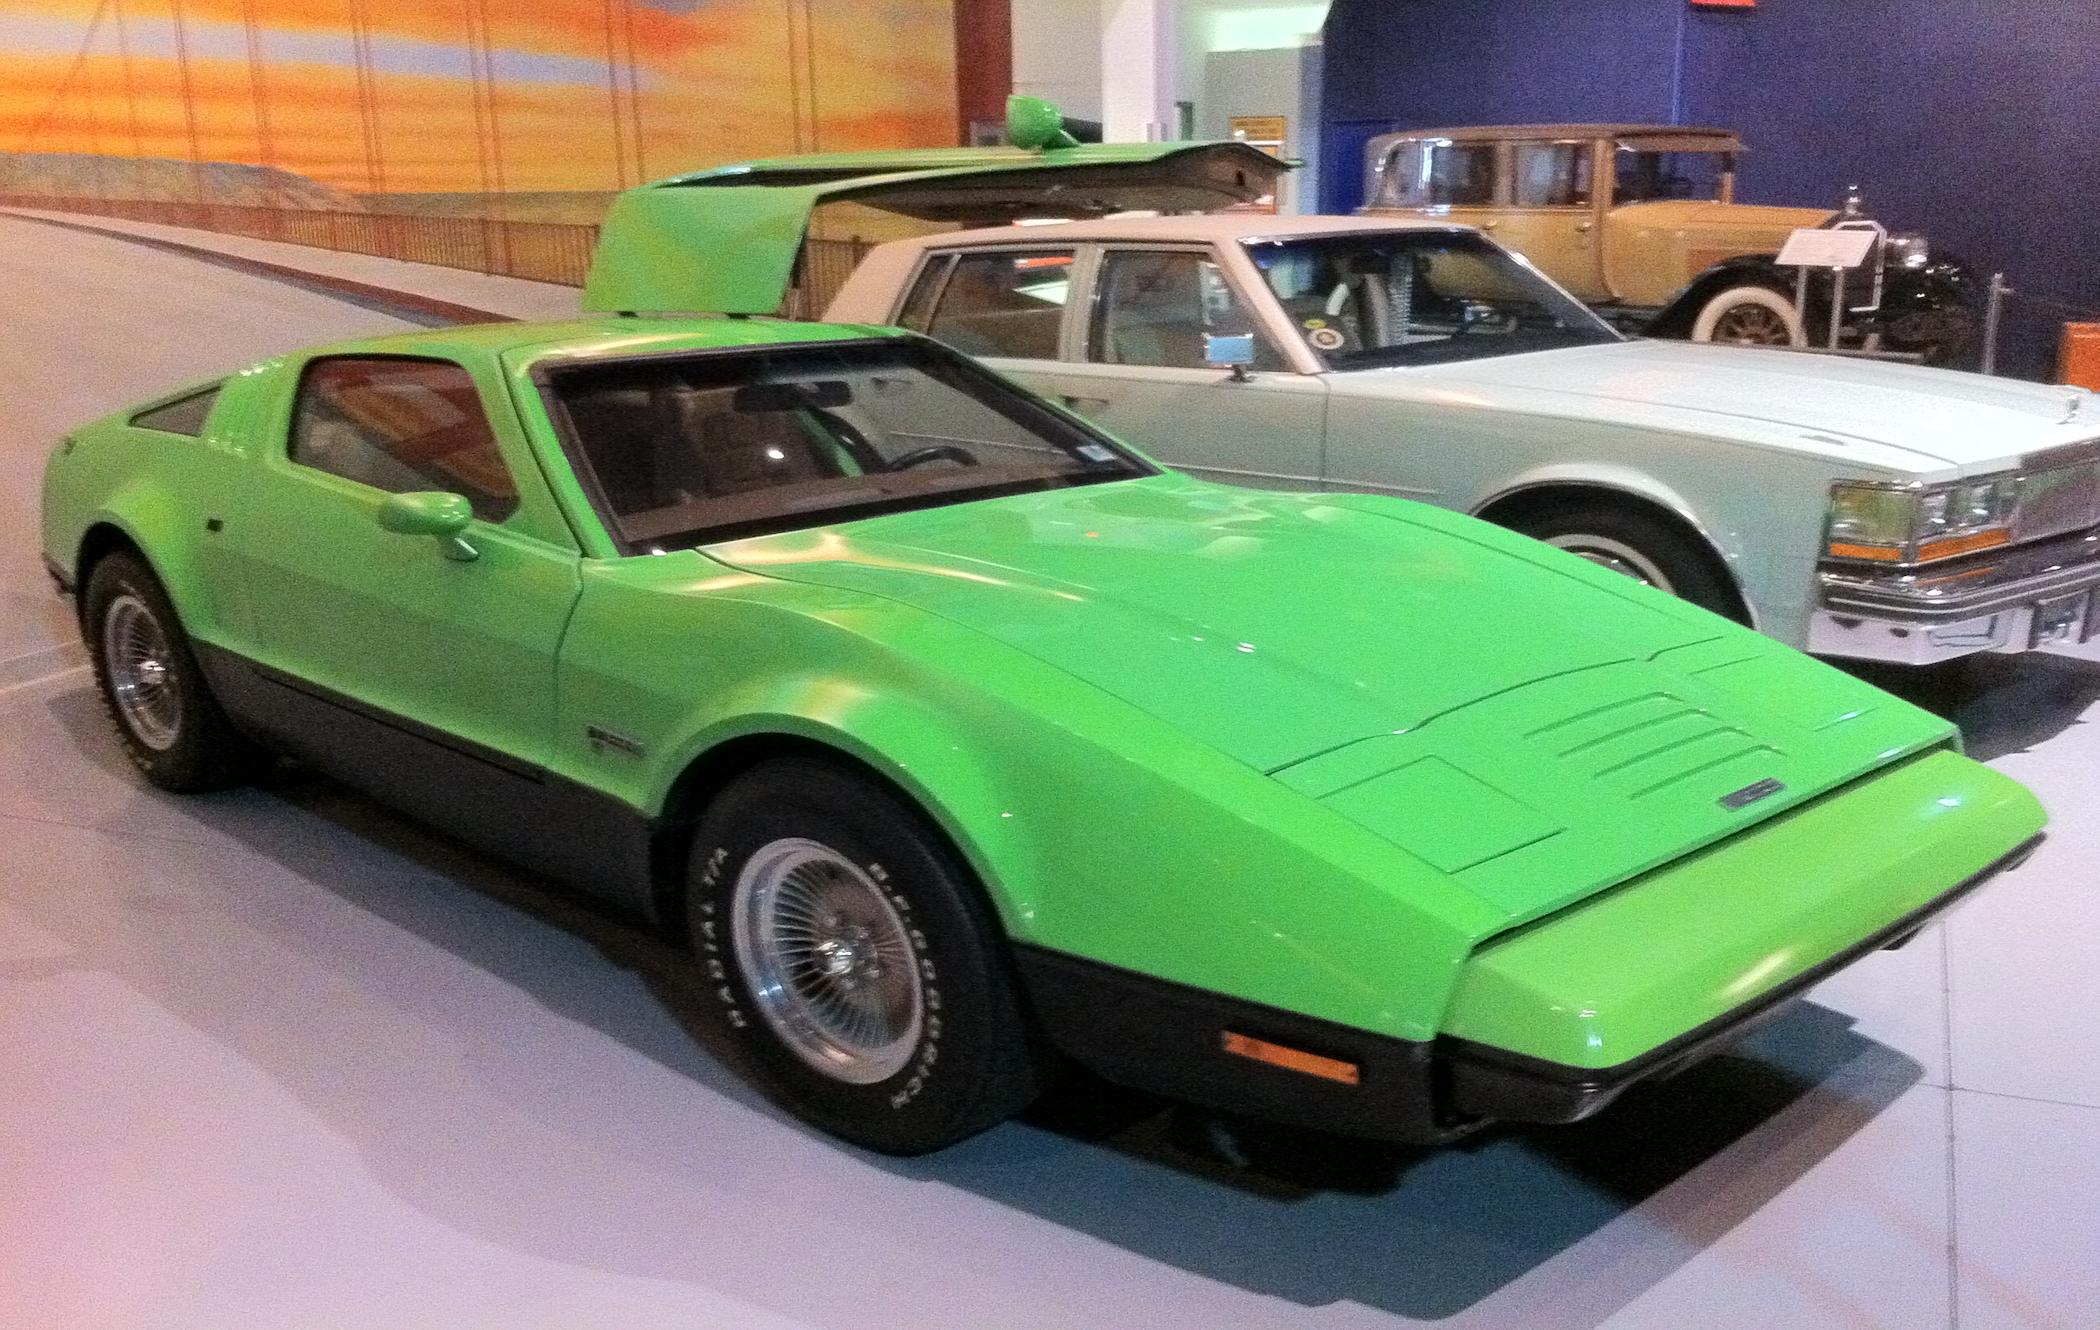 A lime green Bricklin SV-1 in the AACA museum